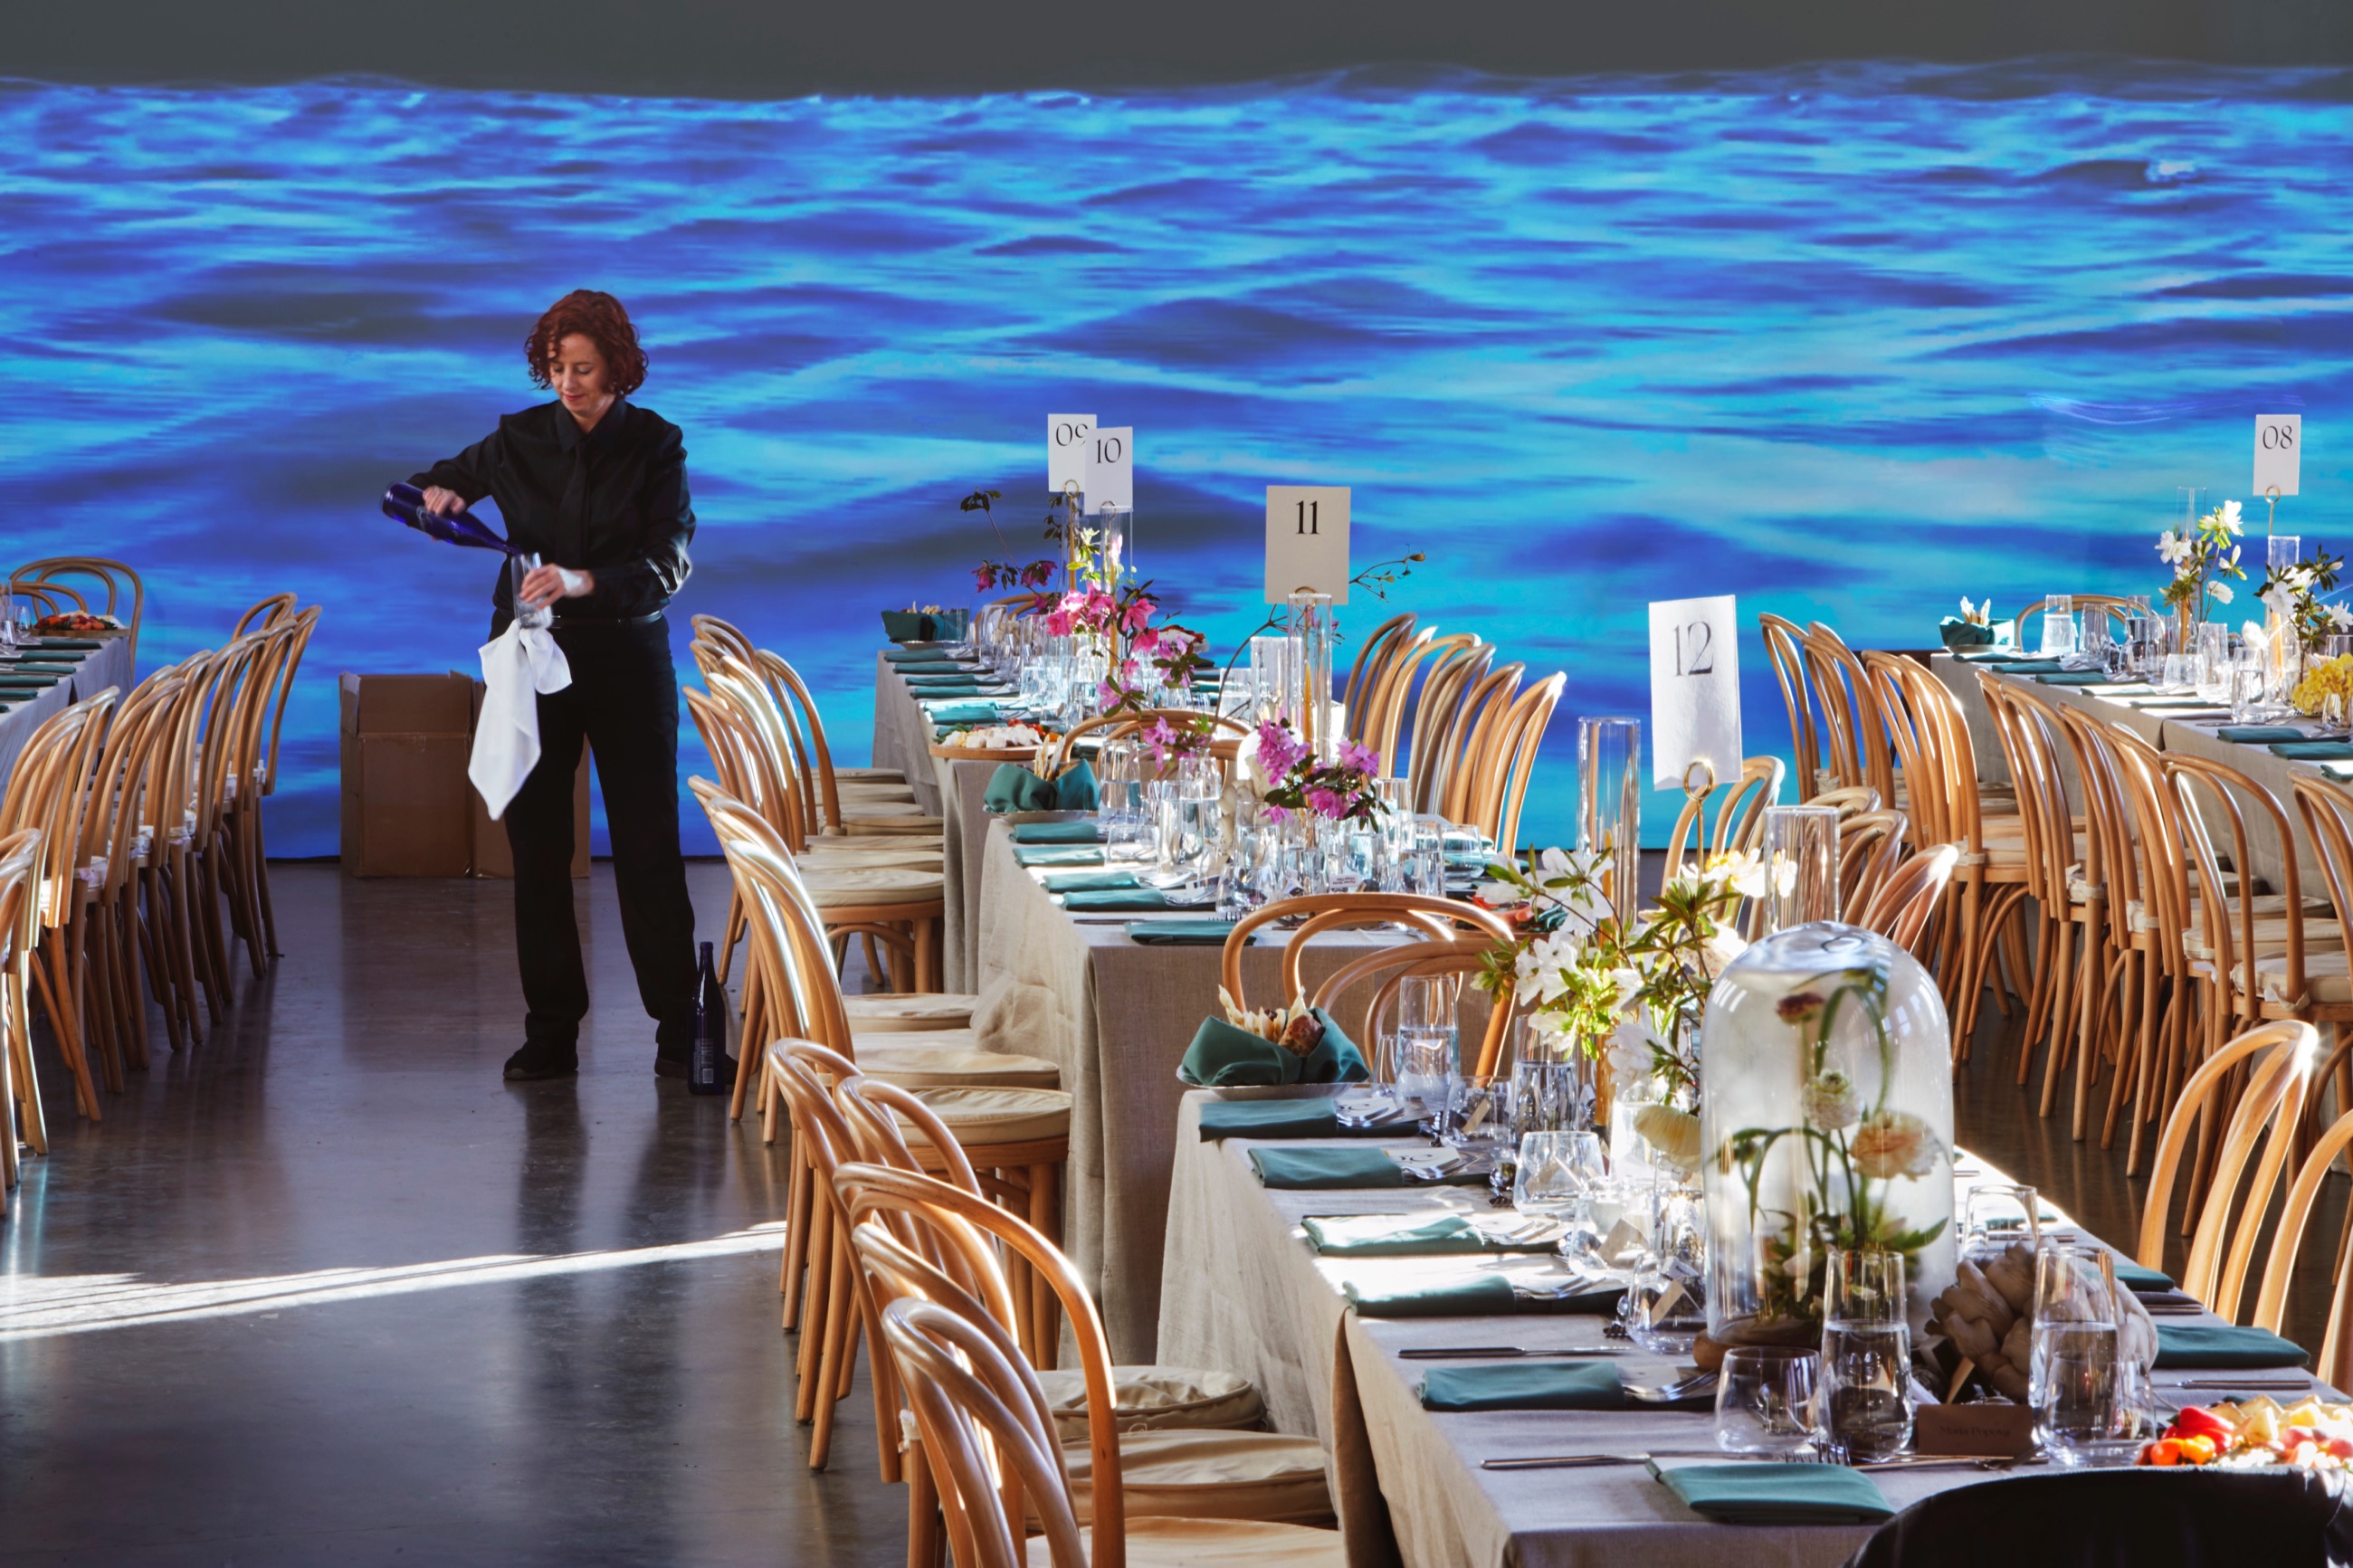 Small thumbnail image of Foreground: white table clothed tables with numbers suggesting a gala event, though no one is seated at them yet. Middleground: a server pours water into a glass. Background: a video of a body of water is projected on a white wall.